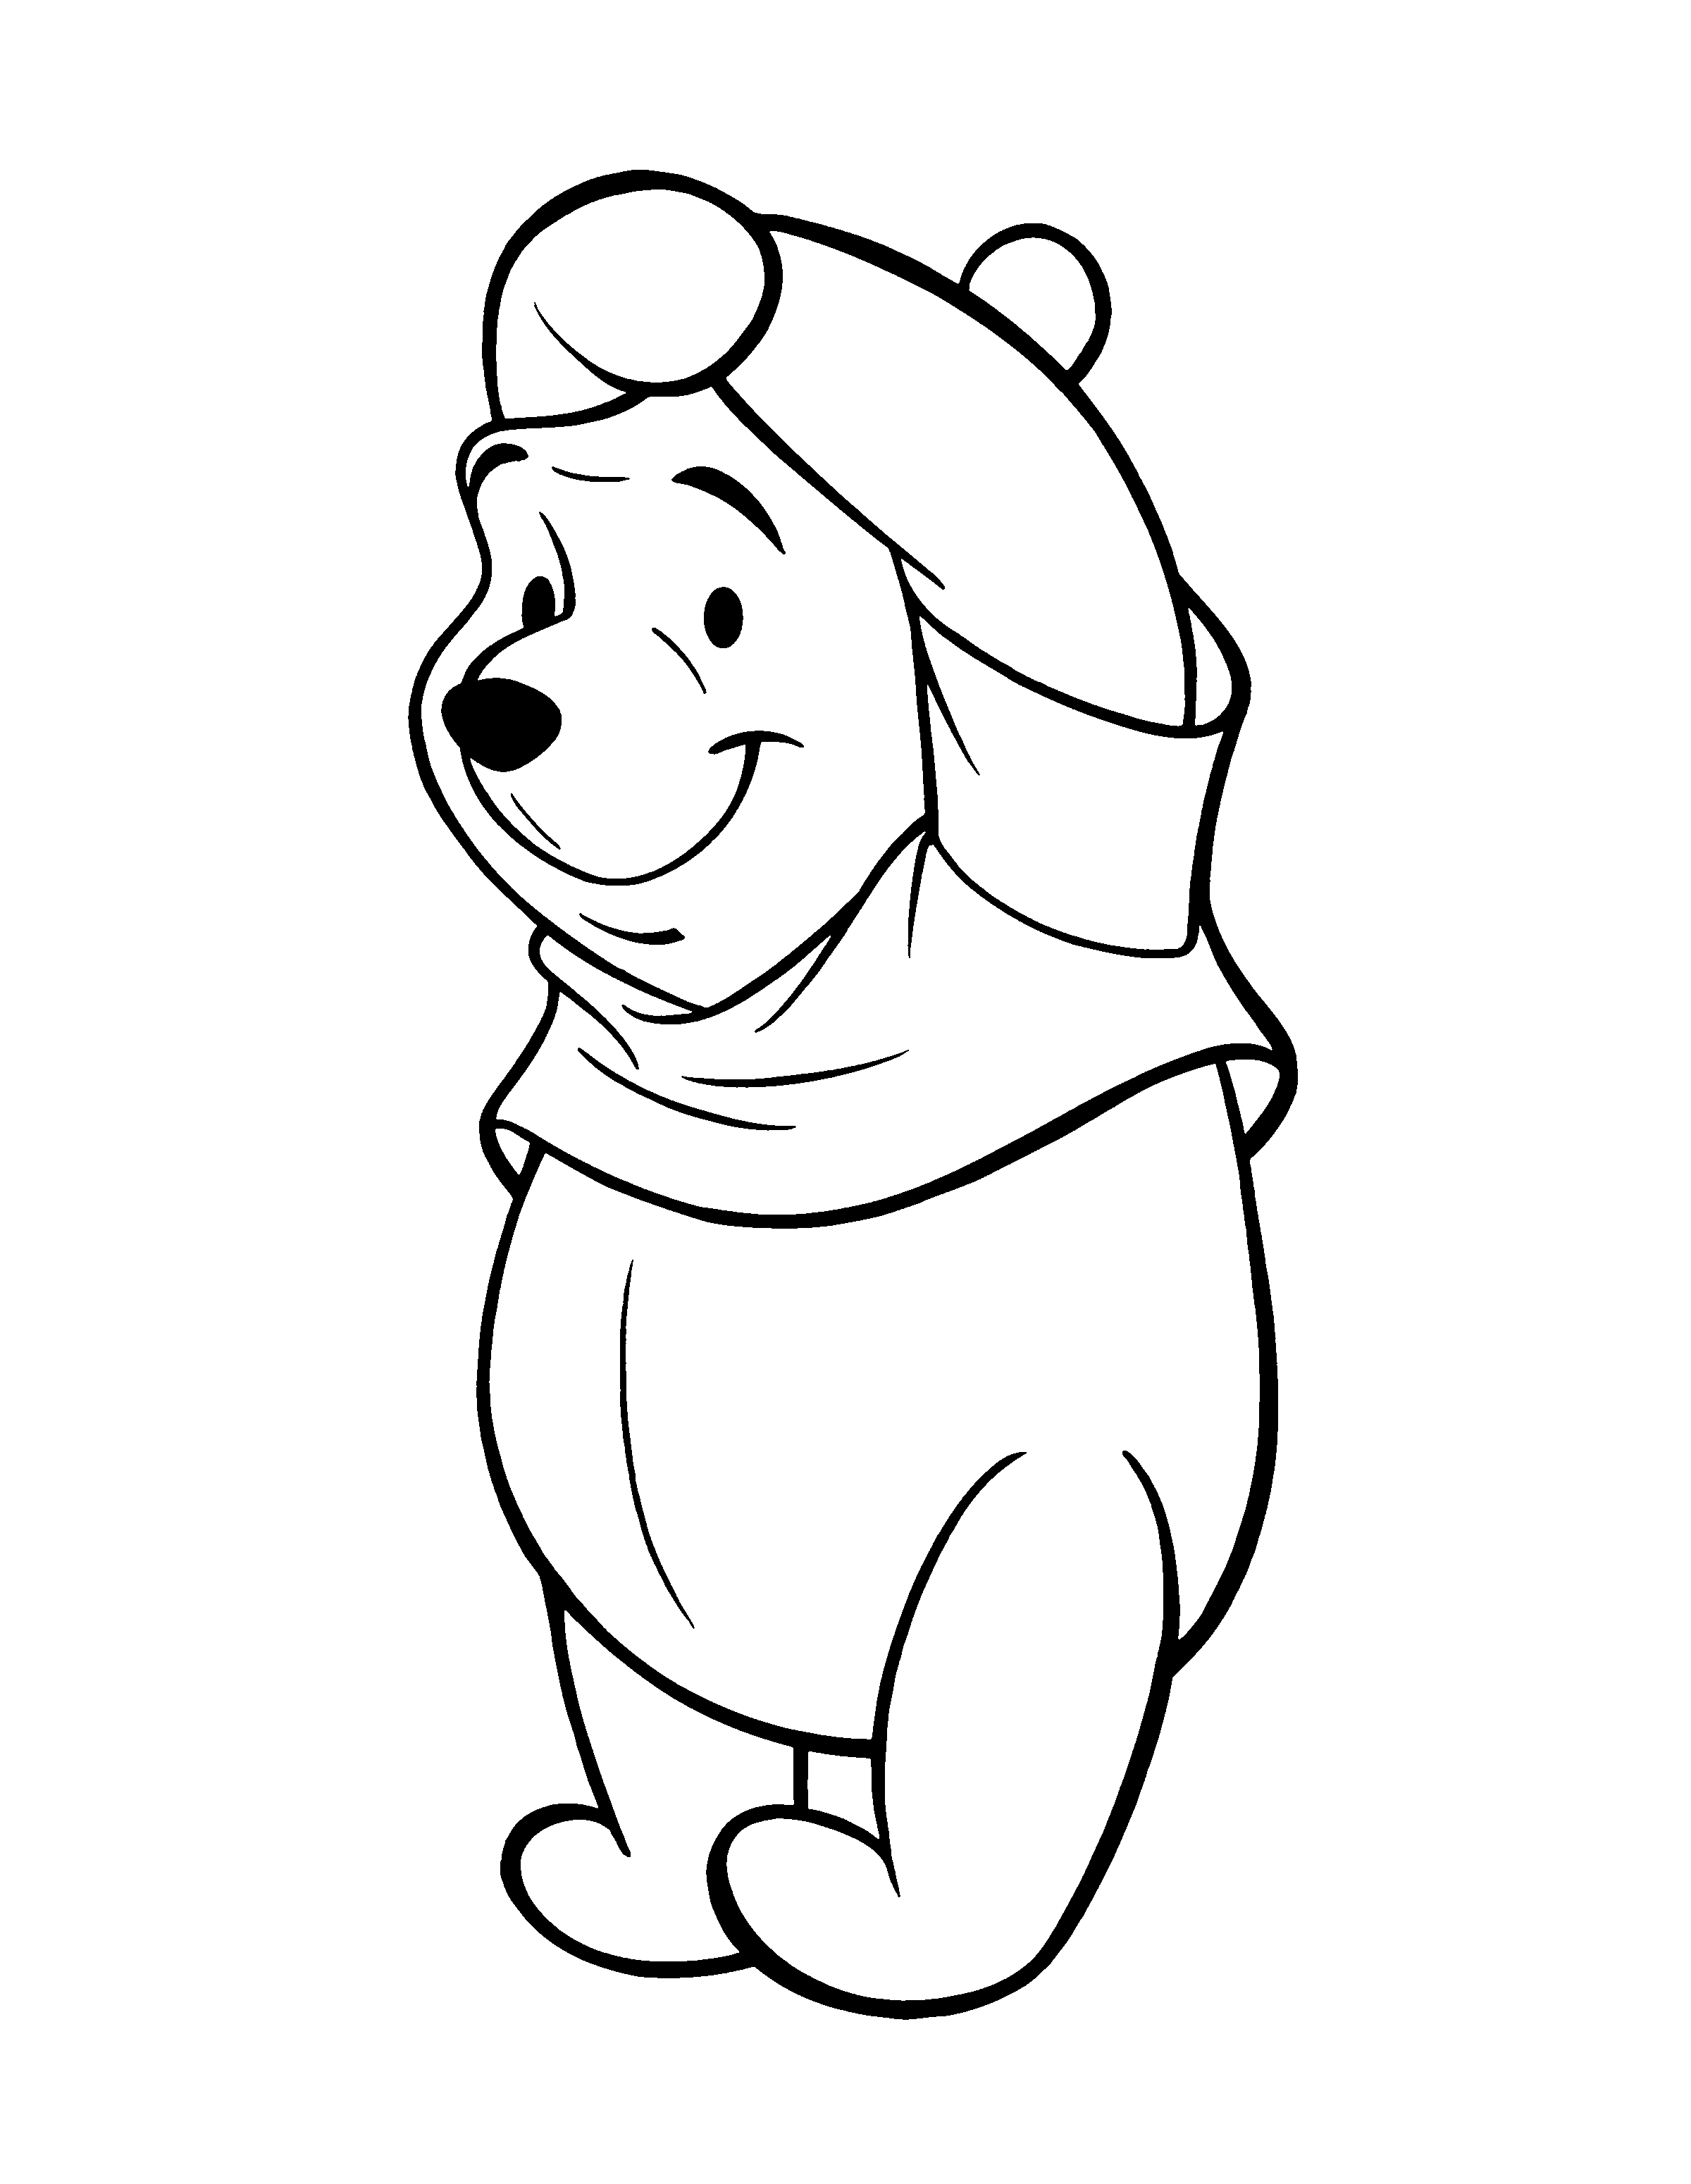 free winnie the pooh coloring pages free printable winnie the pooh coloring pages for kids pooh free the coloring winnie pages 